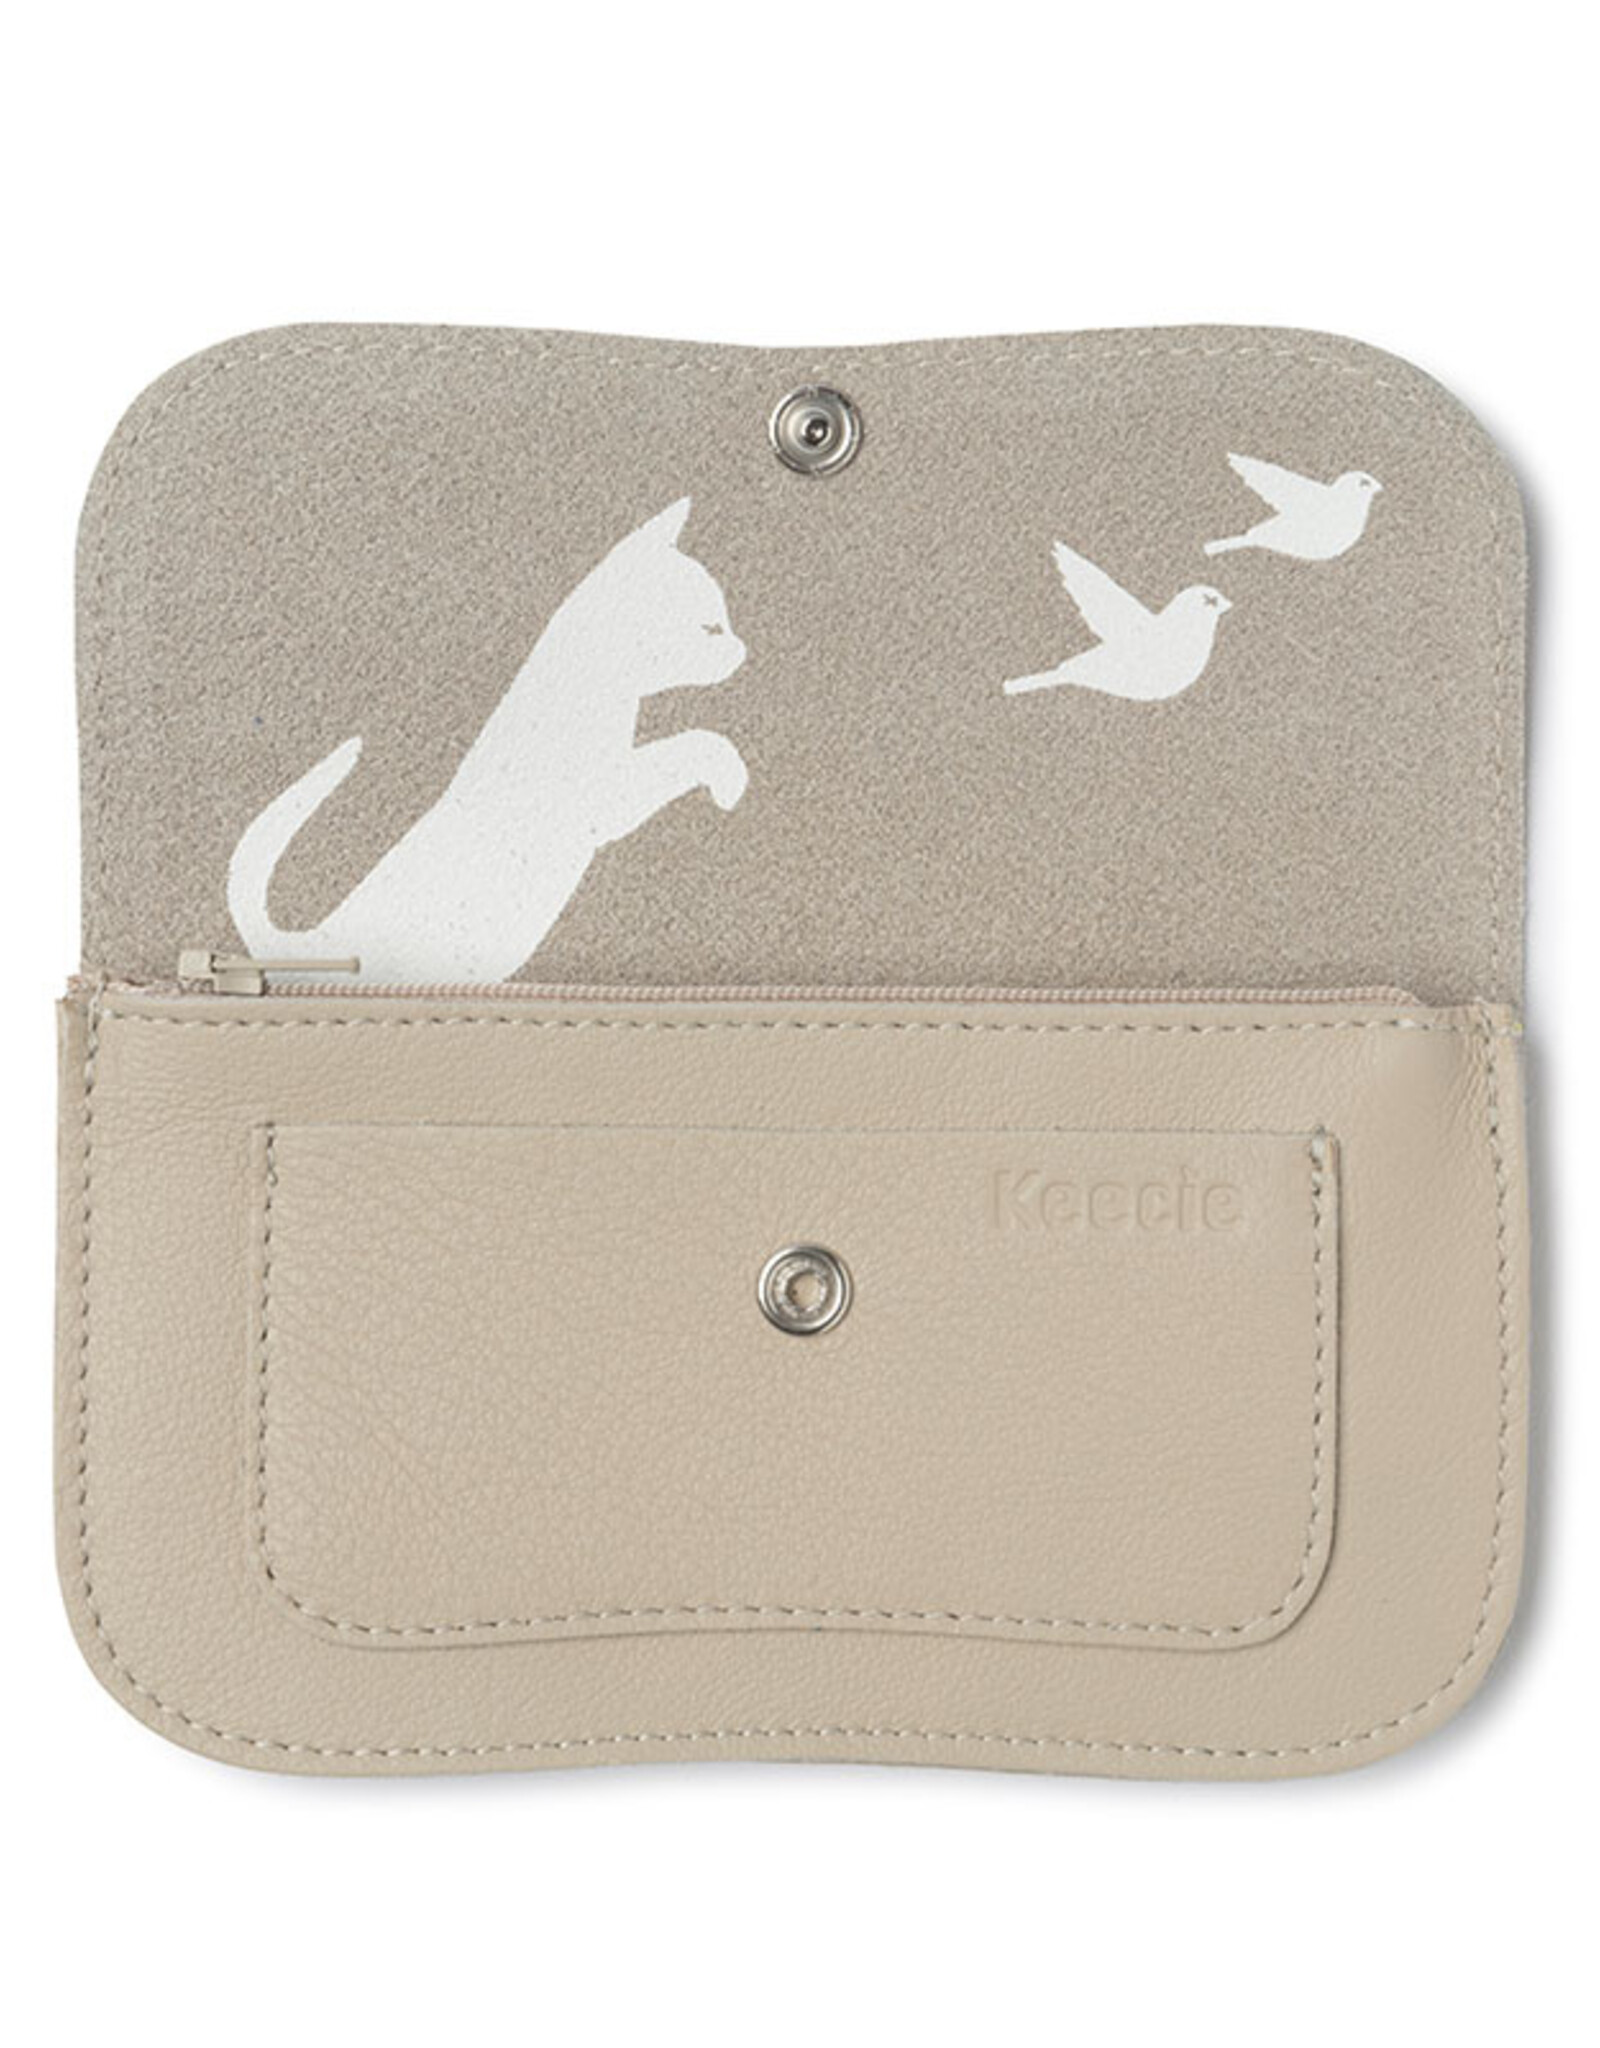 Keecie Wallet Medium Cat Chase-cement